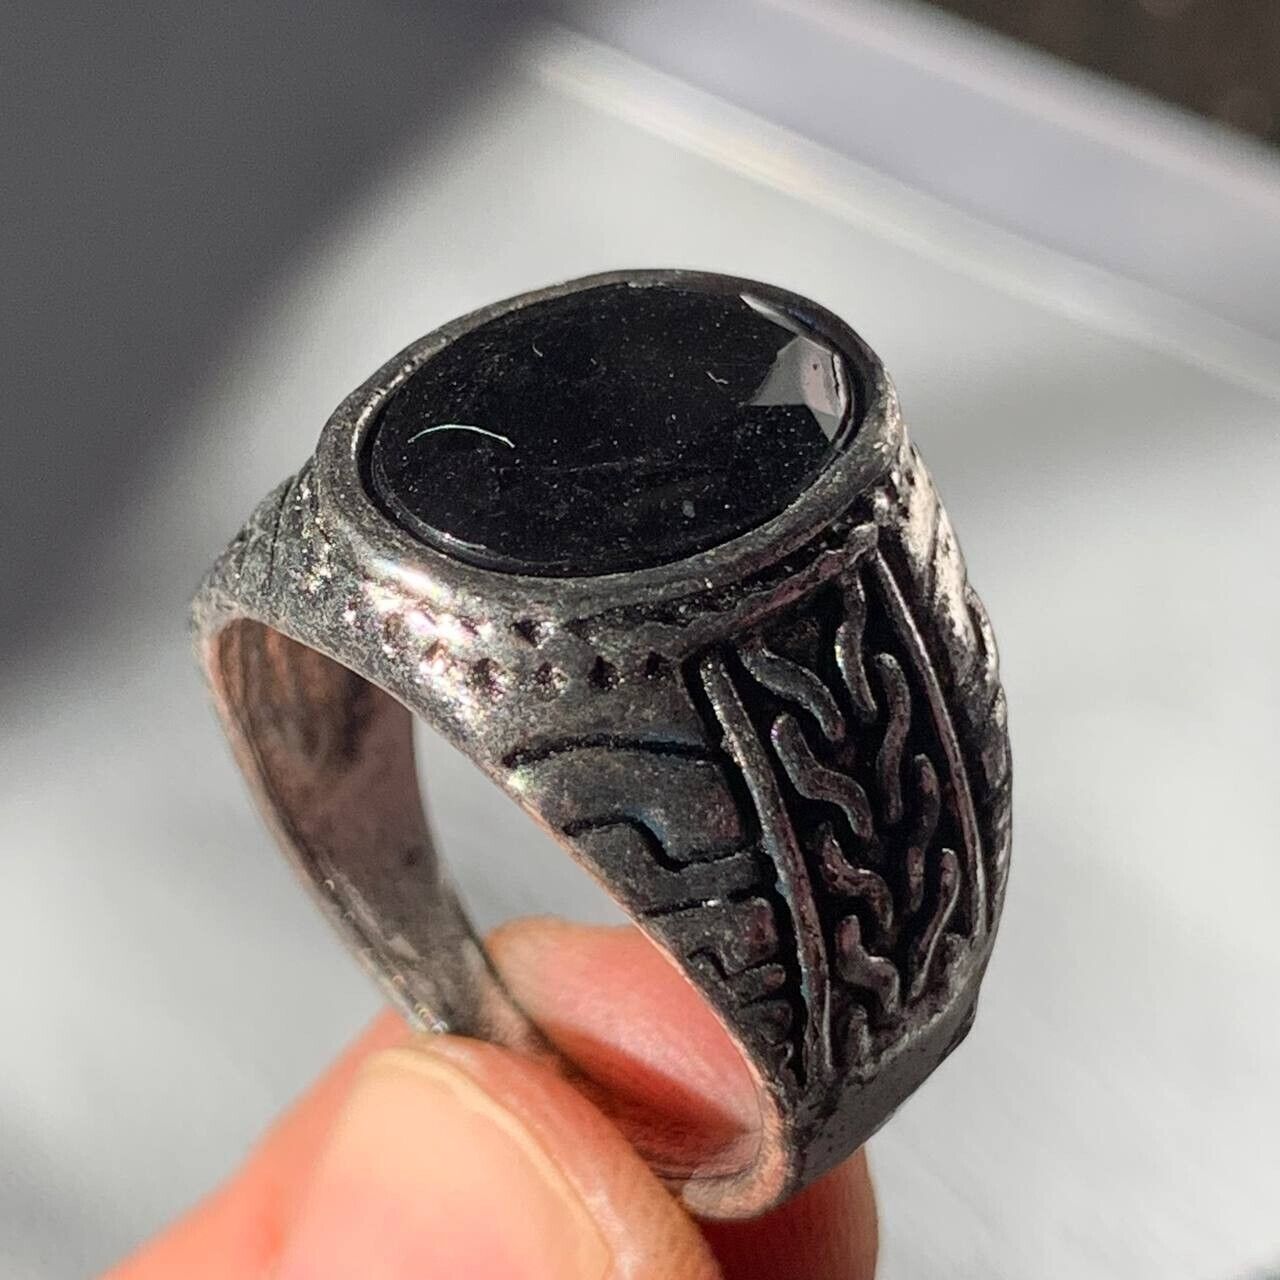 EXTREMELY VERY RARE ANCIENT SILVER ROMAN RING BLACK STONE OLD ARTIFACT AUTHENTIC